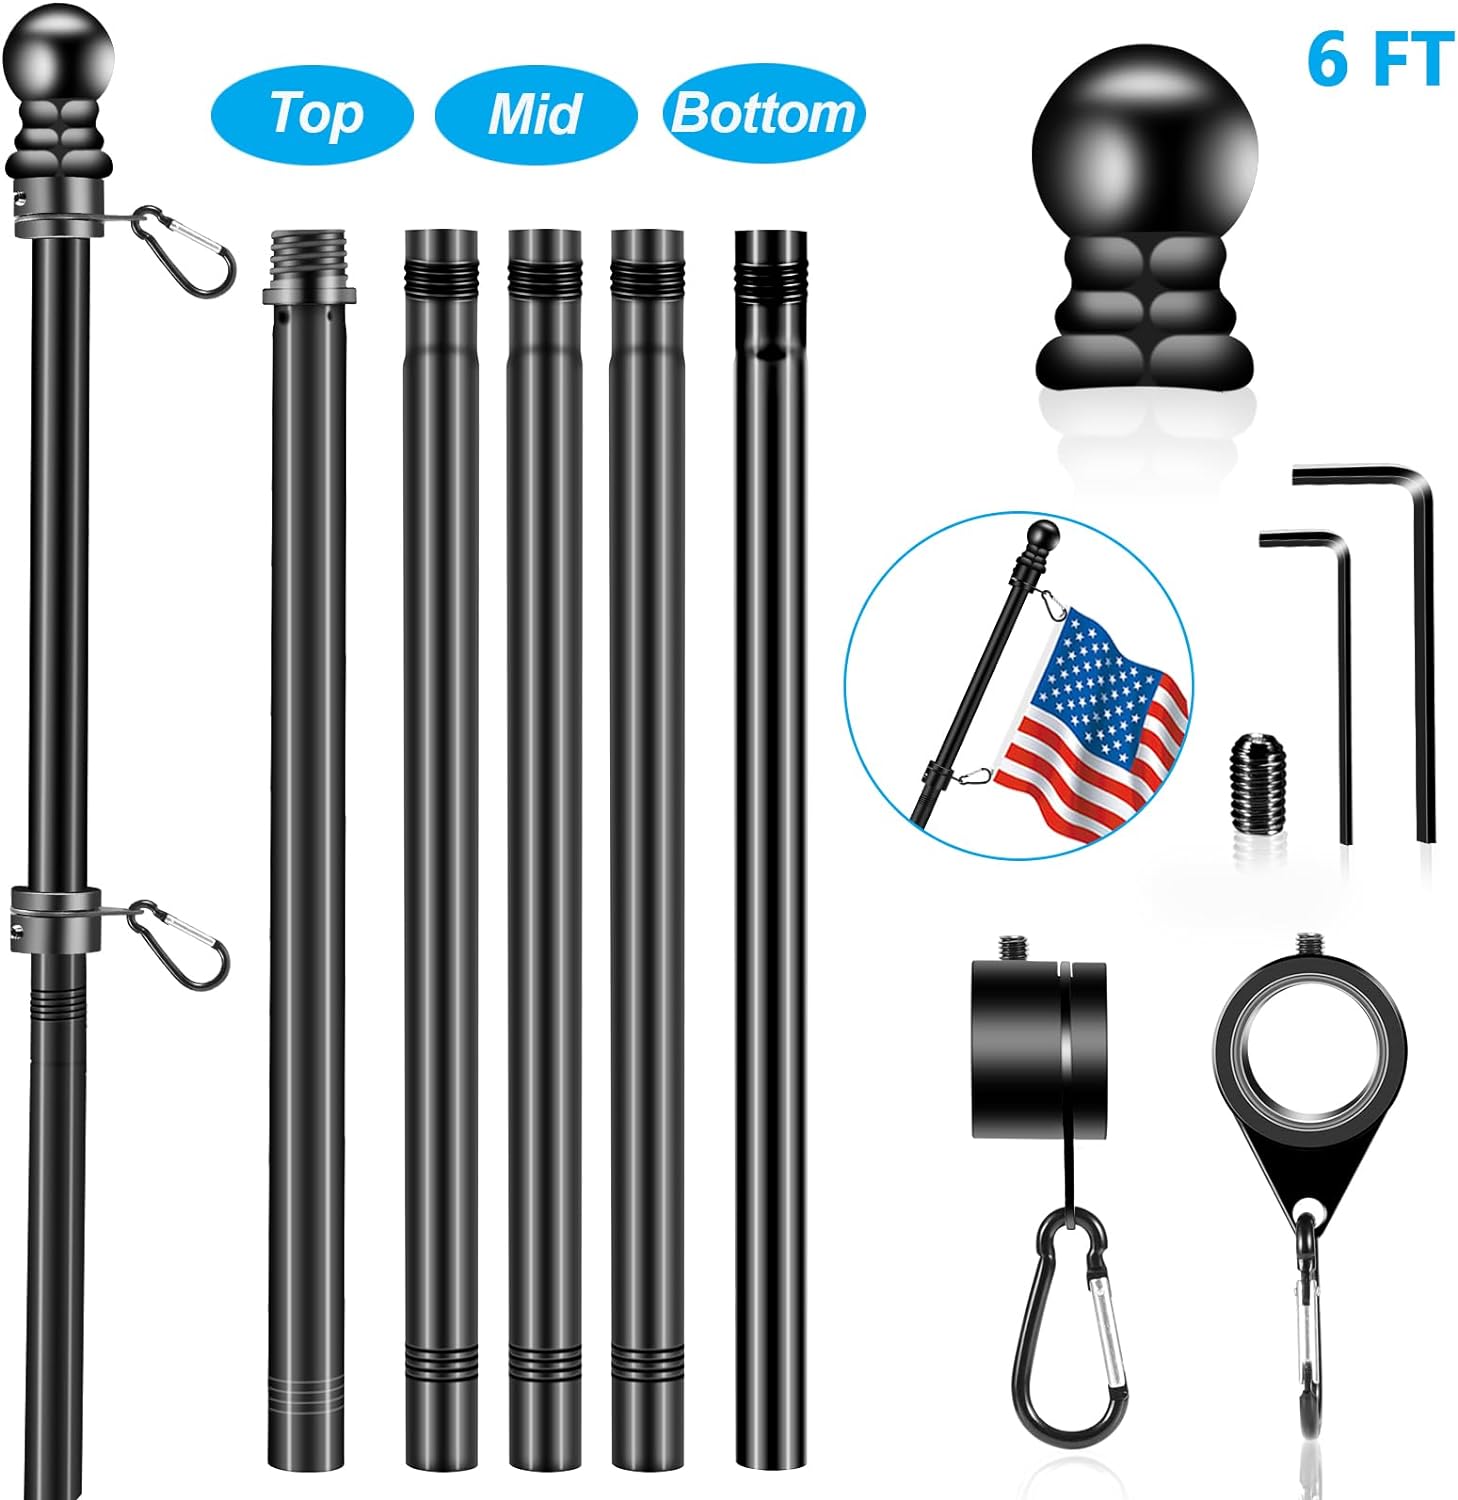 Black Flag Pole Kit for Outside House Porch, 6 FT Thickened Stainless Steel Wall Mount Flag Pole for 3x5'/4x6' American Flag, 1" Anti-Wrap Spinning Flagpole Rings (6 FT - No Bracket - Black)